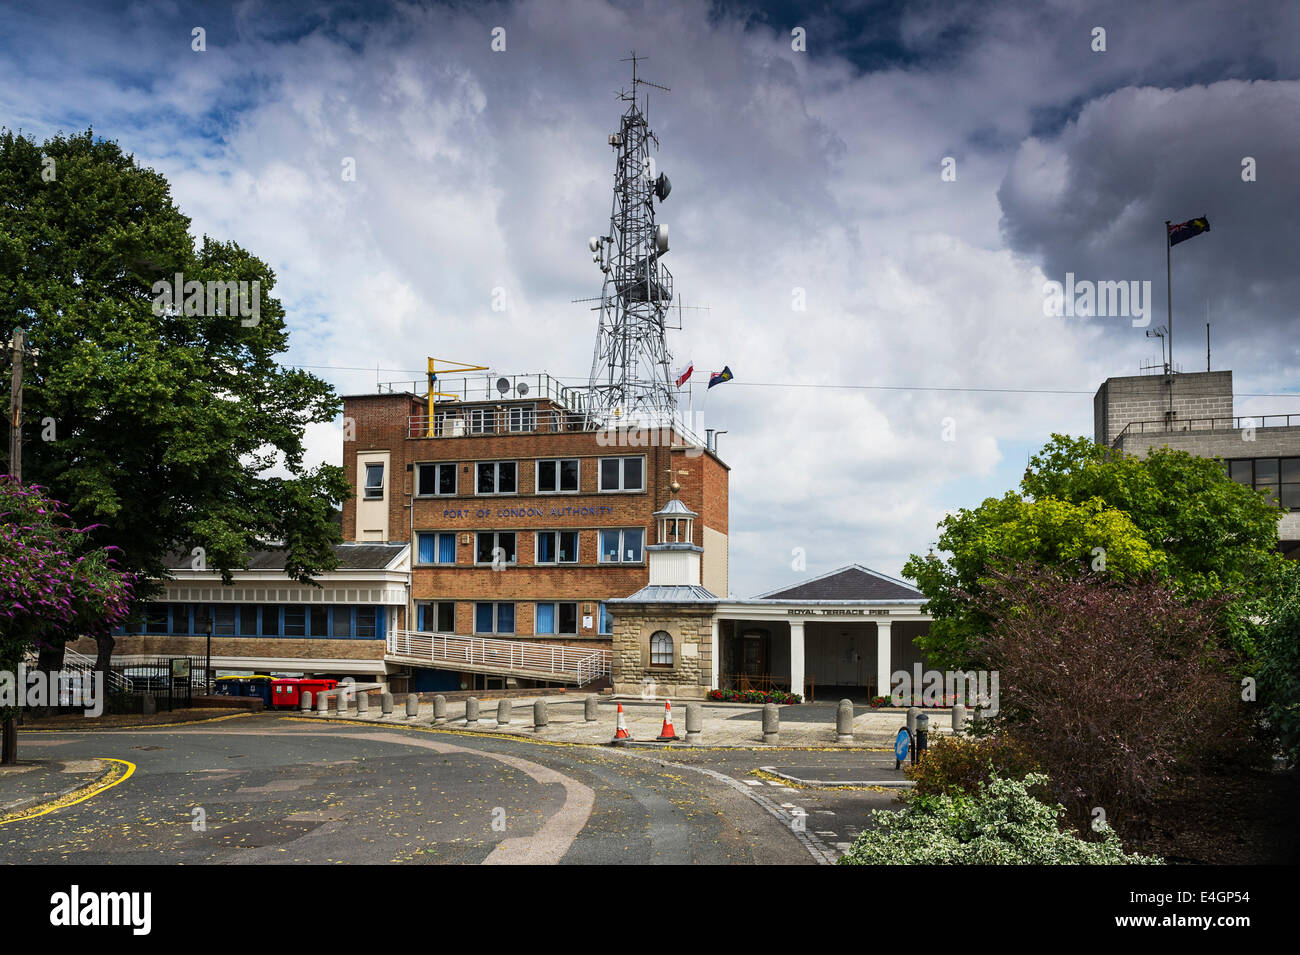 The Port of London Authority building in Gravesend. Stock Photo